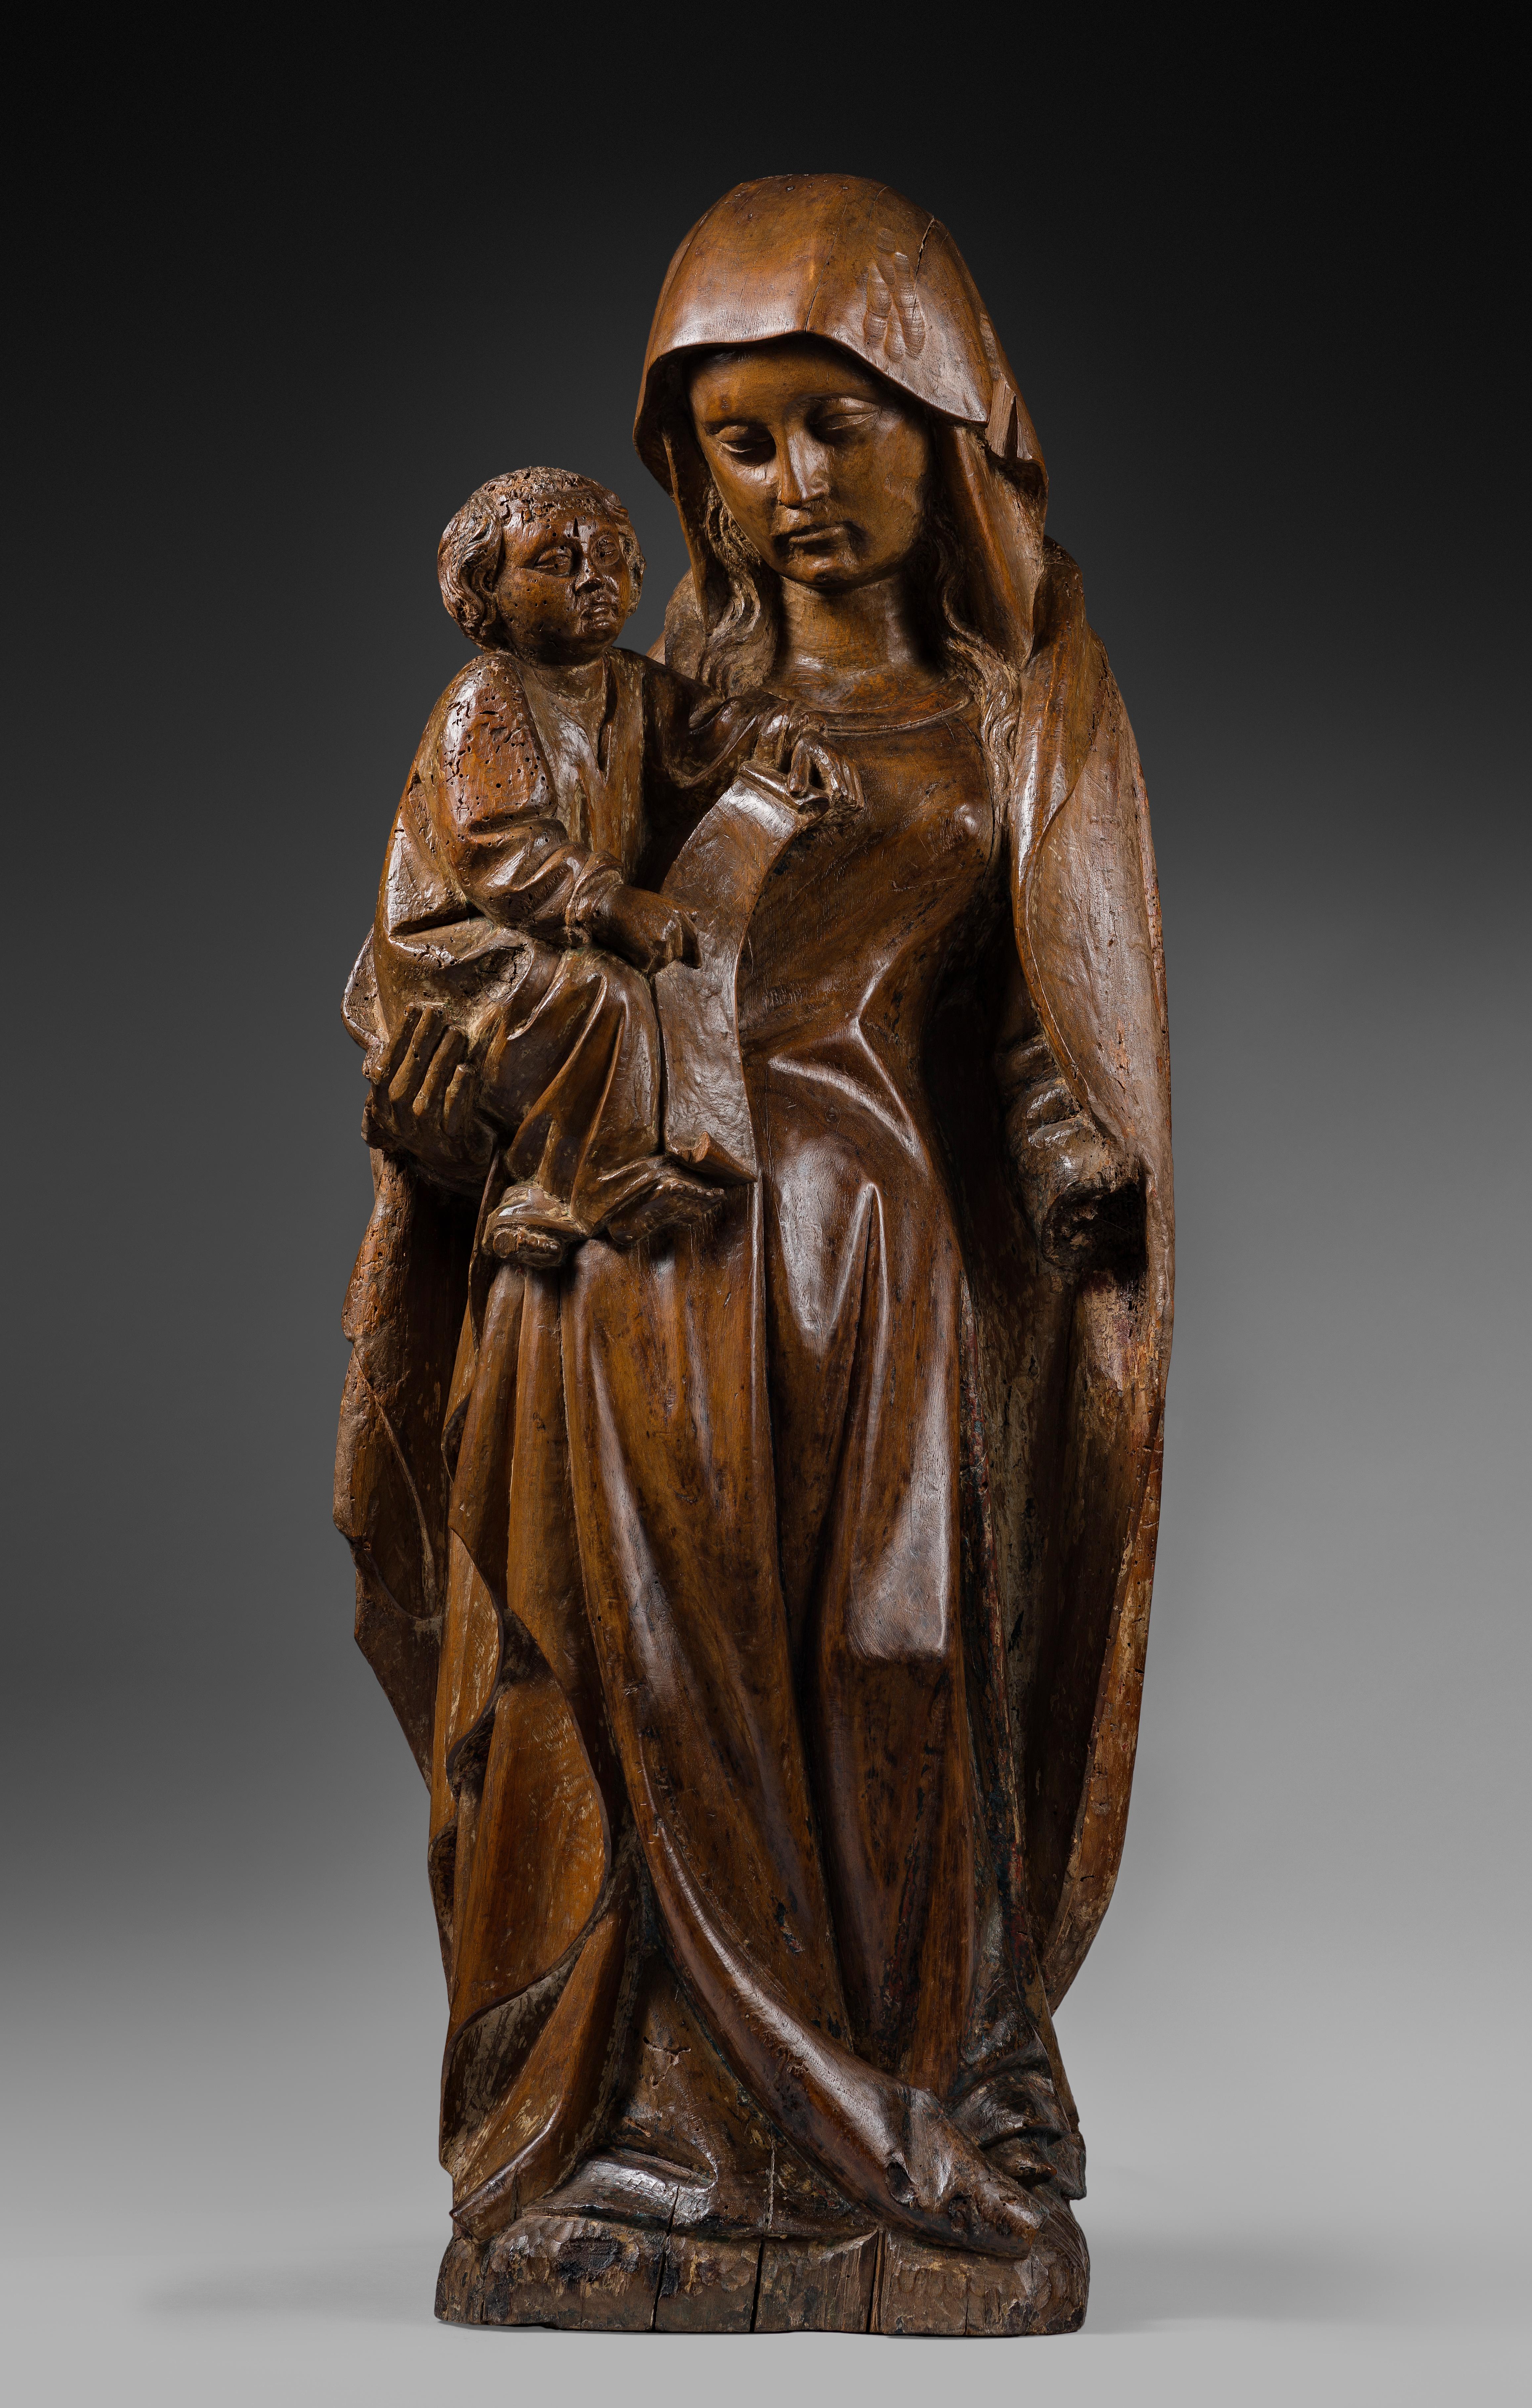 This Virgin and Child is wearing clothes with a limited number of folds and showing a thickness characteristic of the Burgundy region. As a result of the presence in the region of the Flemish sculptor Claus Sluter, realizing in Dijon “The Well de